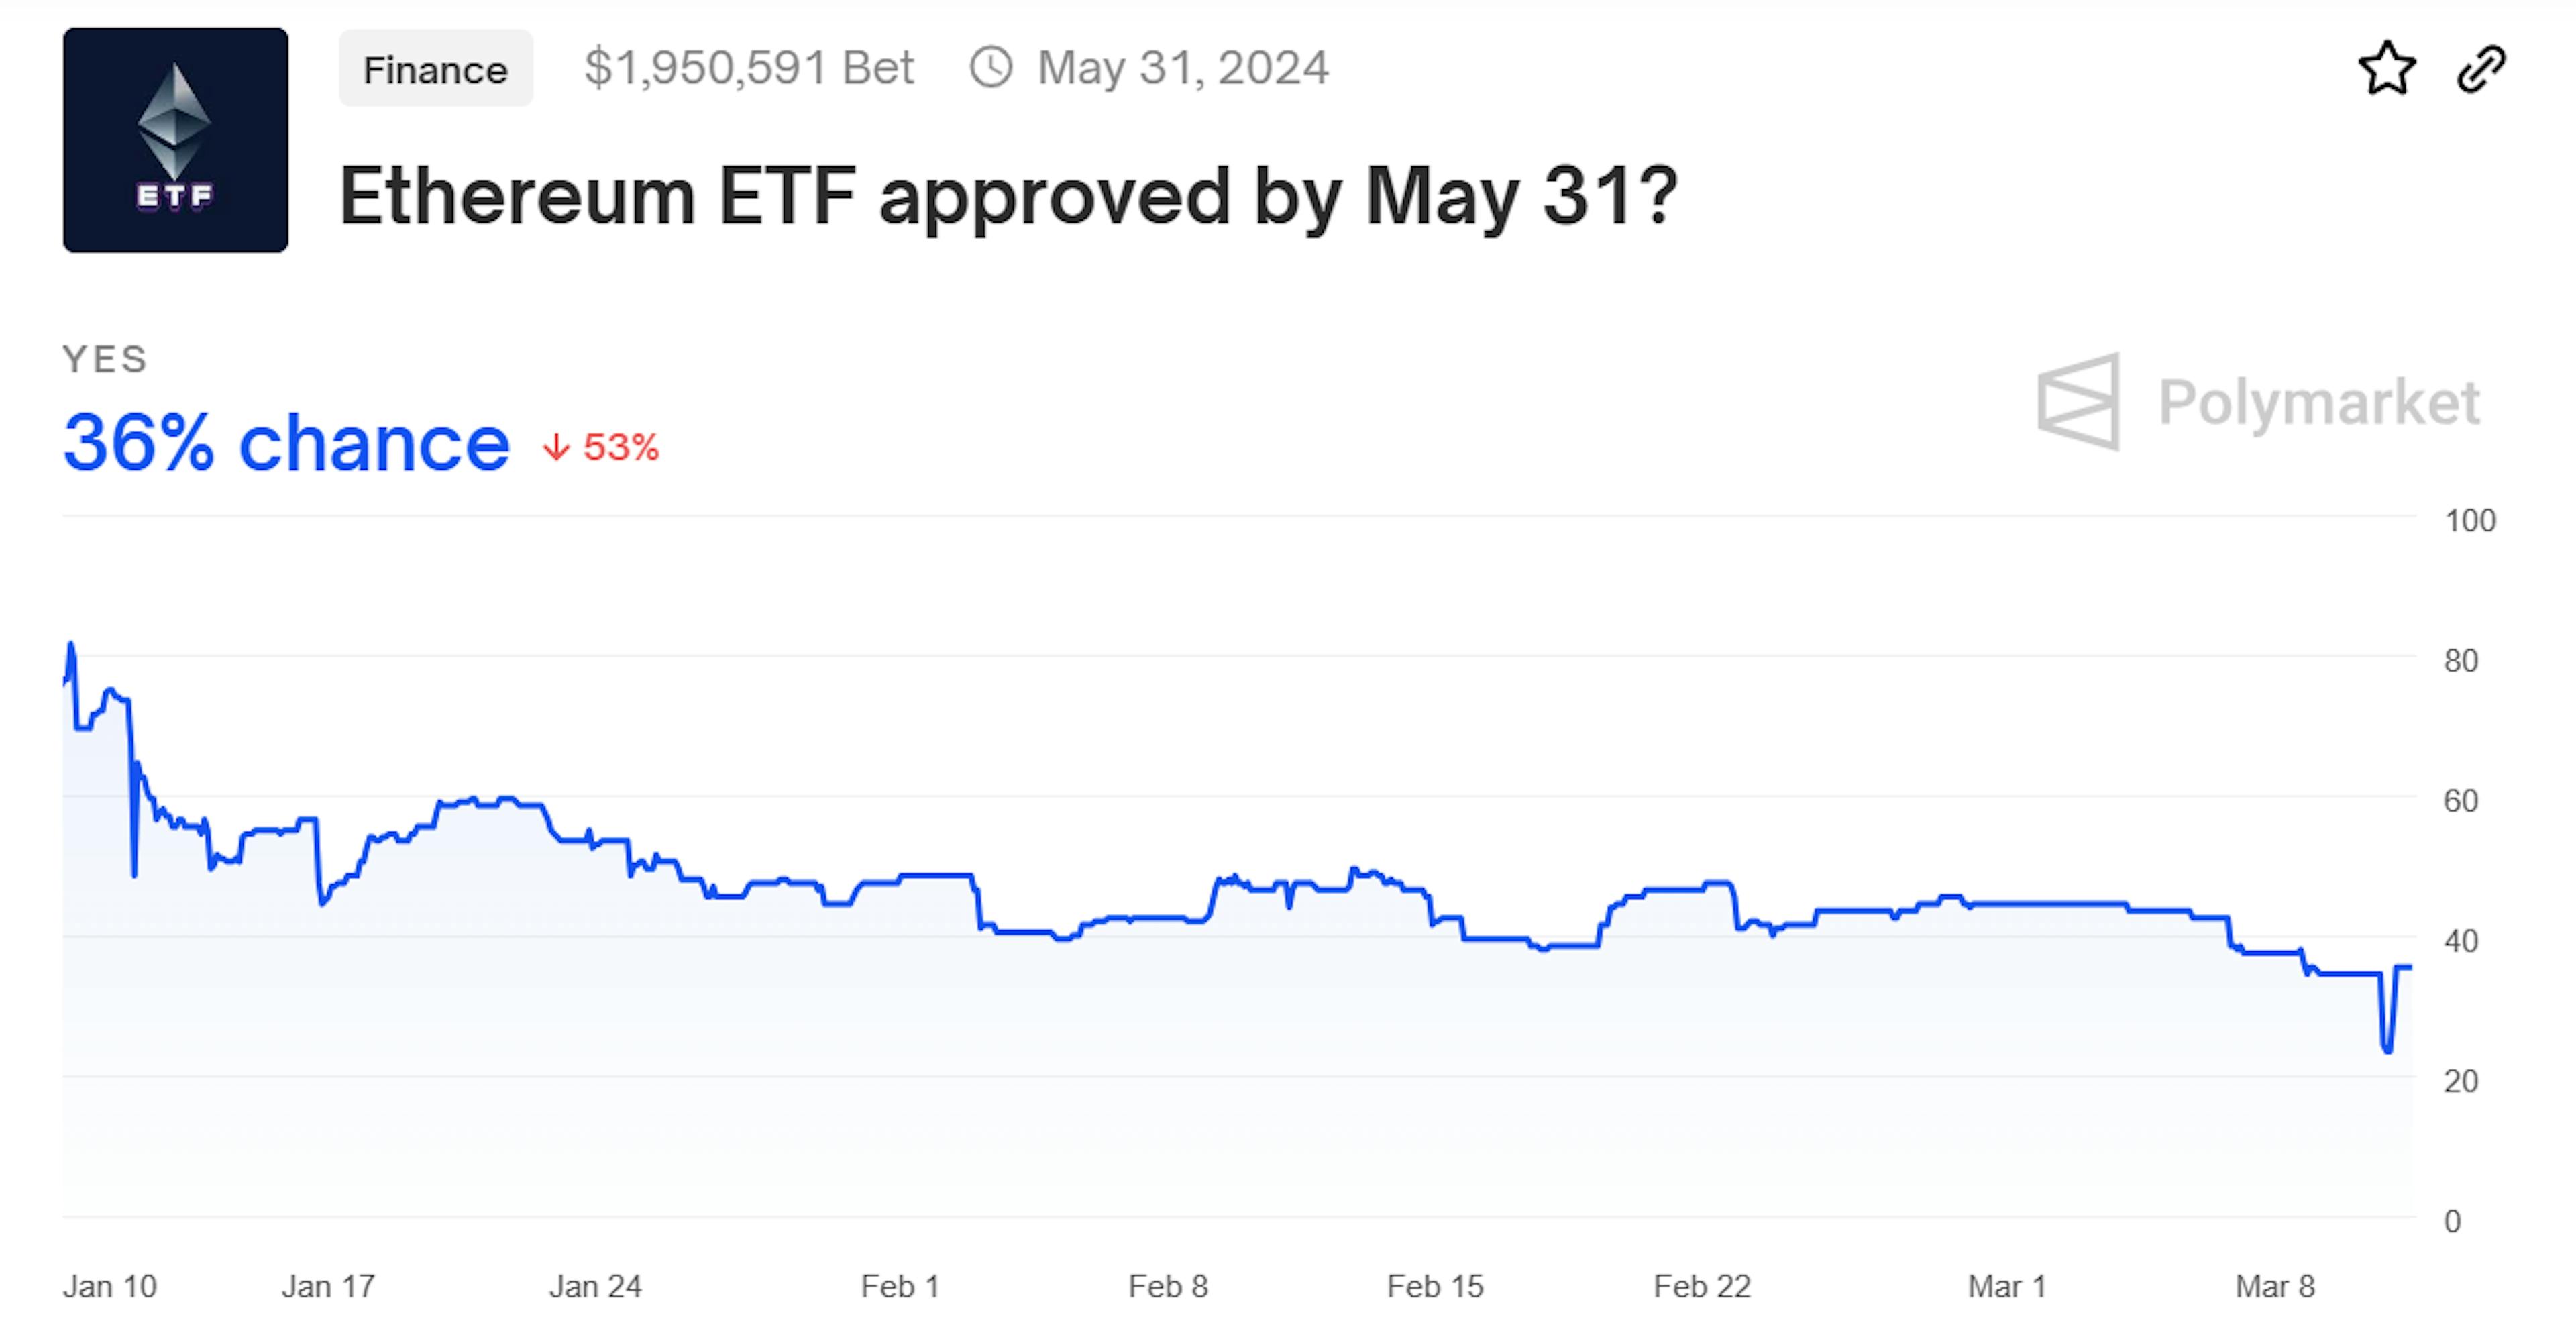 Ethereum ETF approved by May 31?